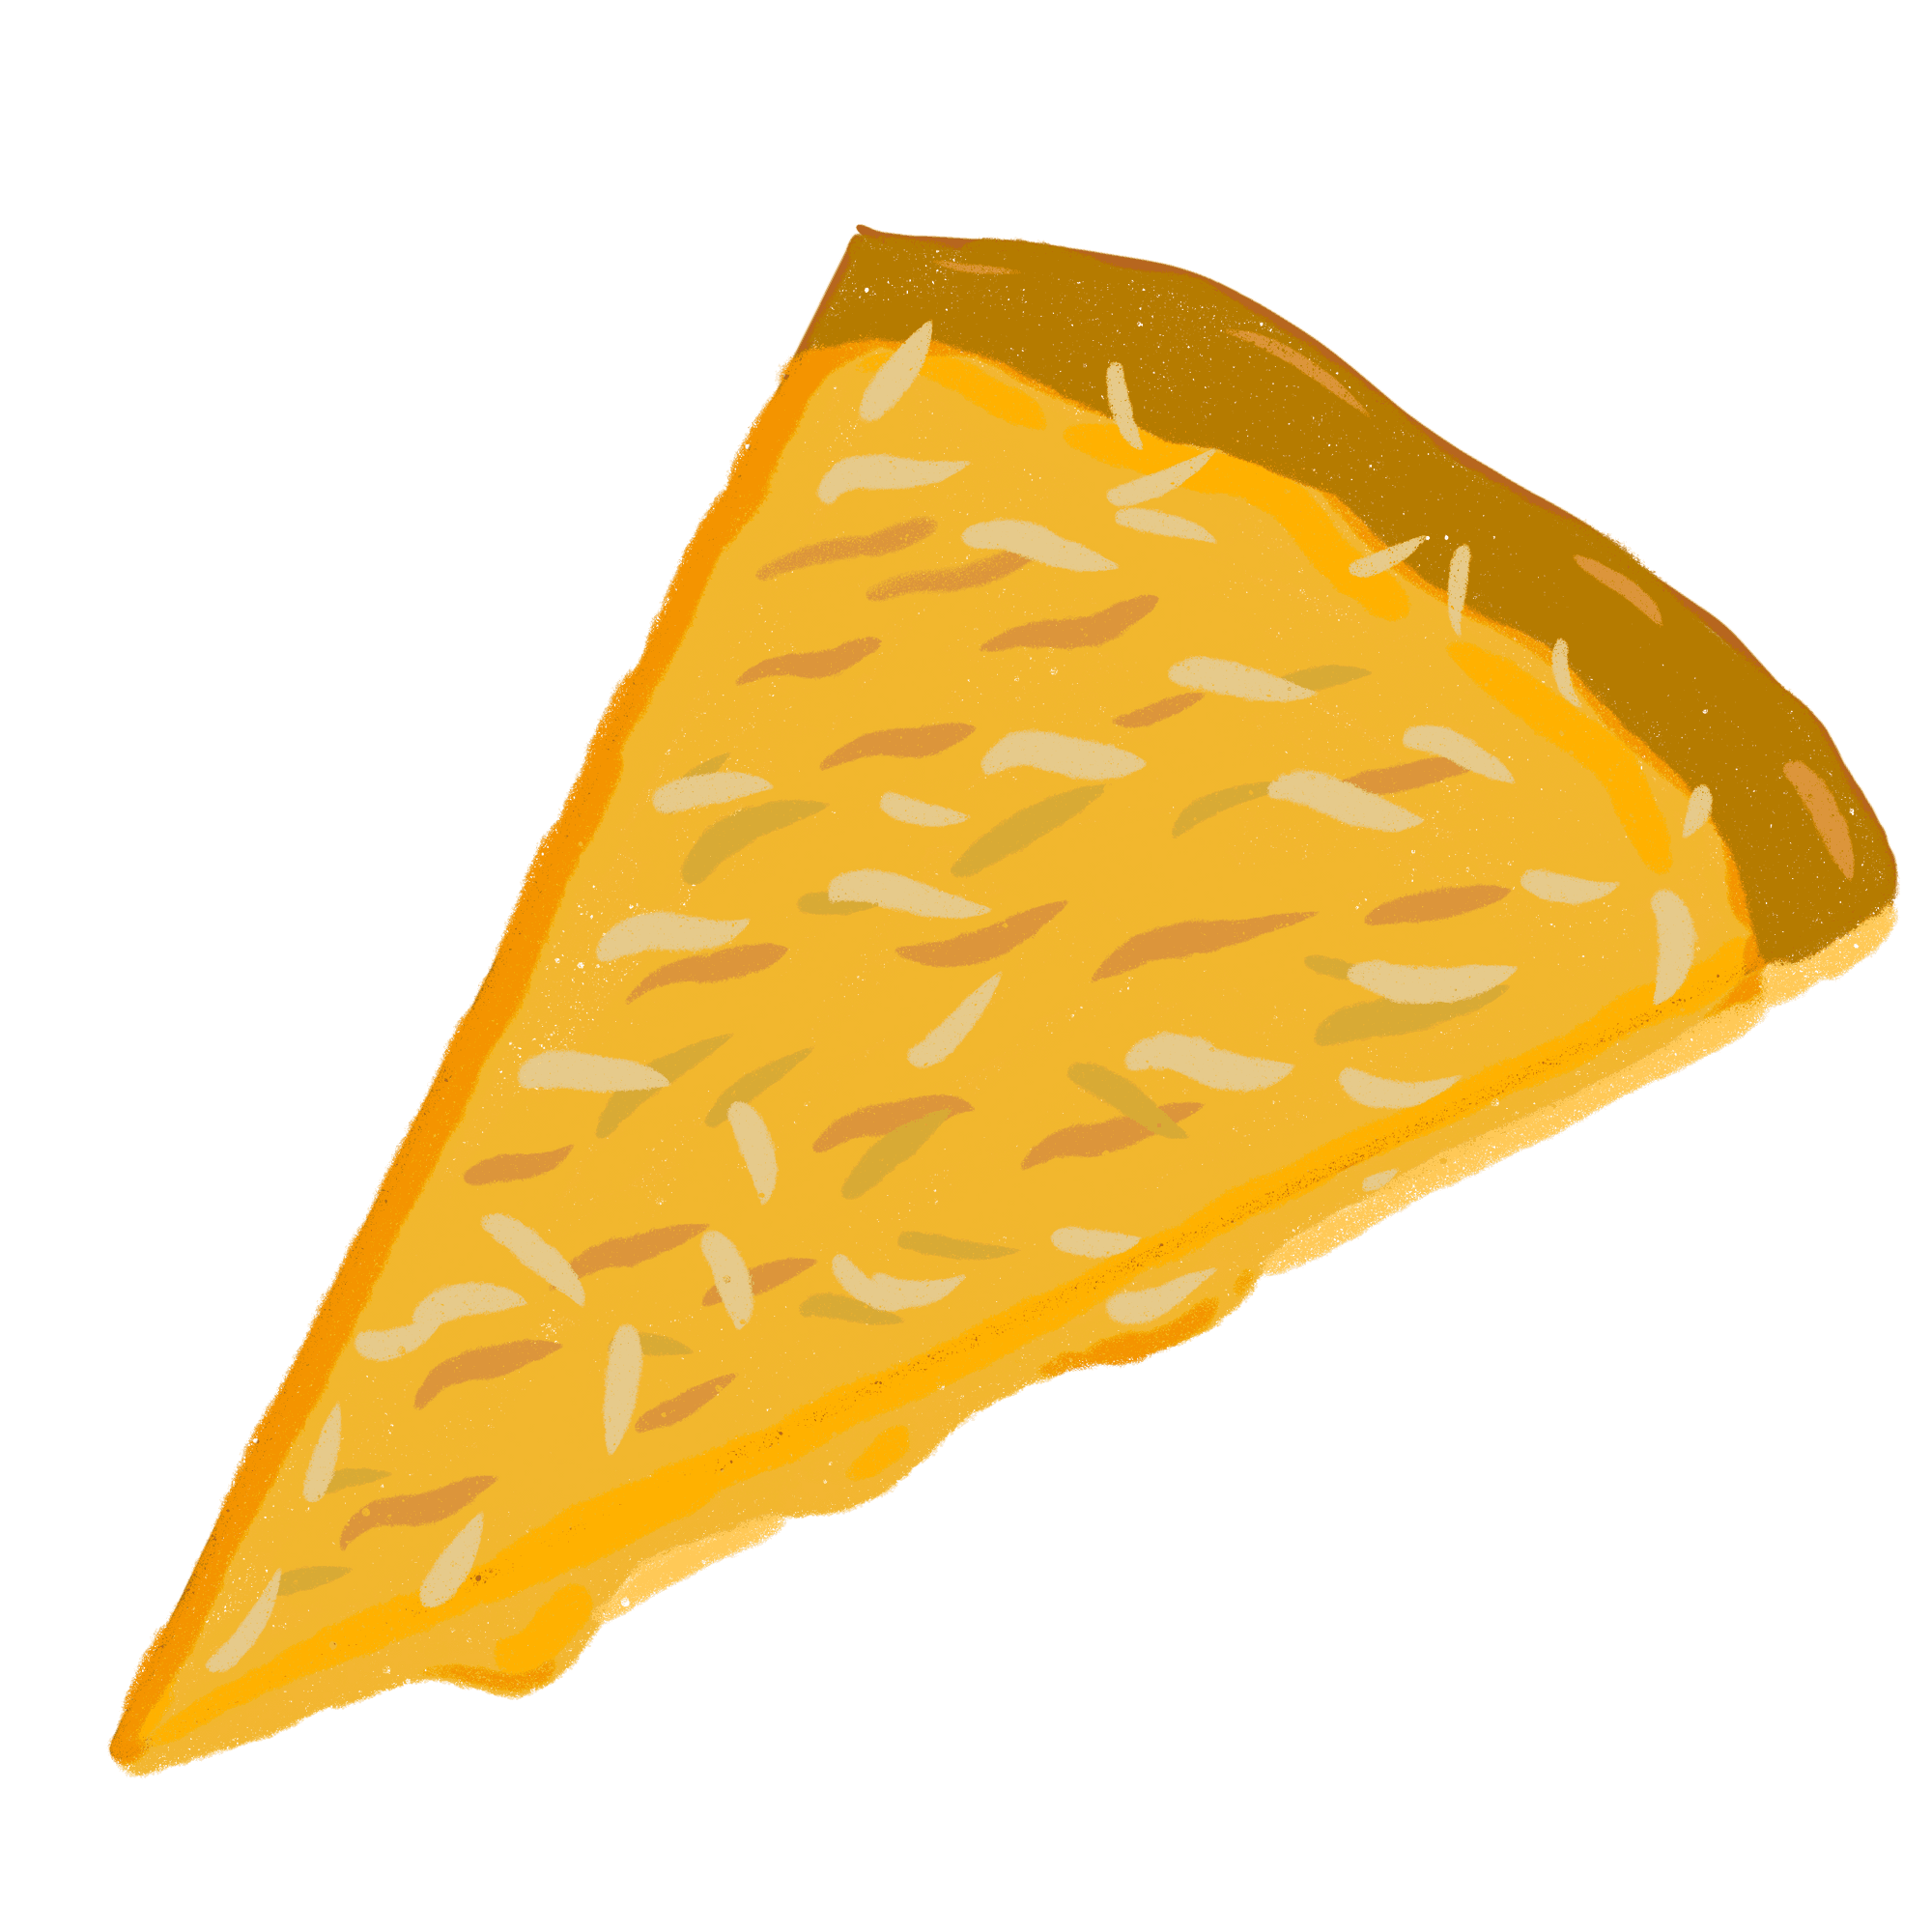 Cheese pizza slice - HappyNFTCafe | OpenSea